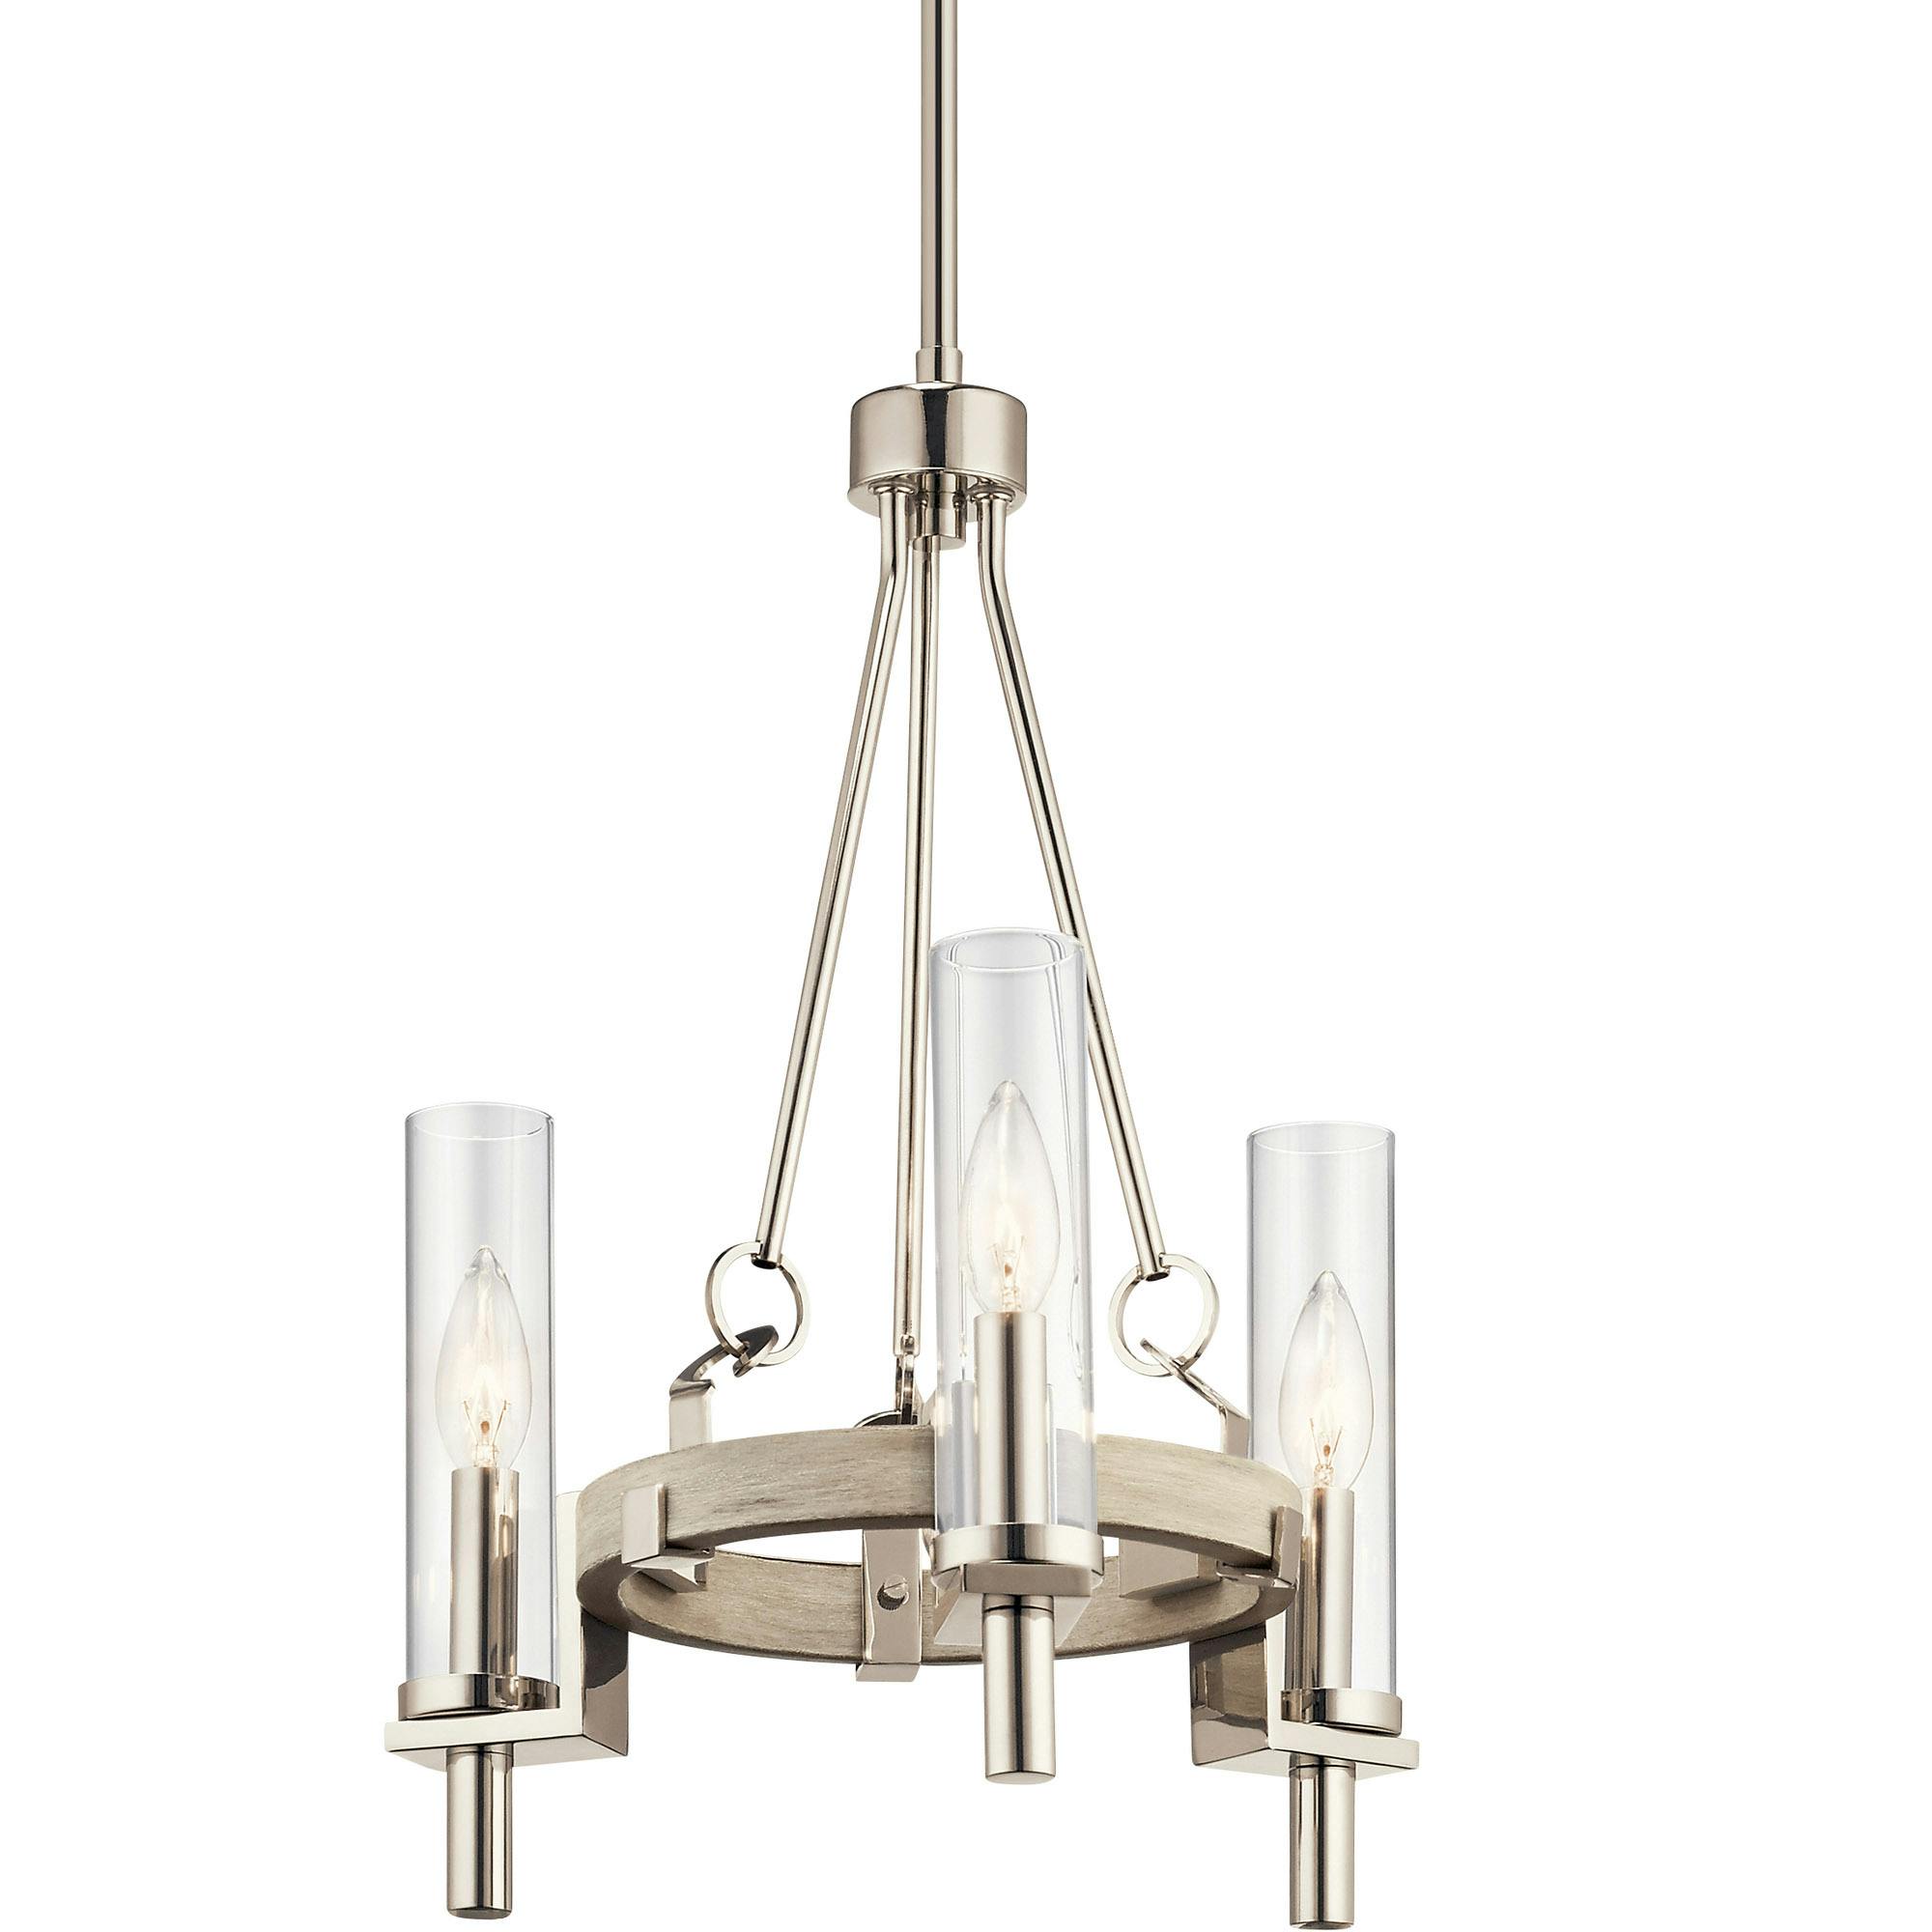 Telan 3 Light Chandelier White Washed without the canopy on a white background